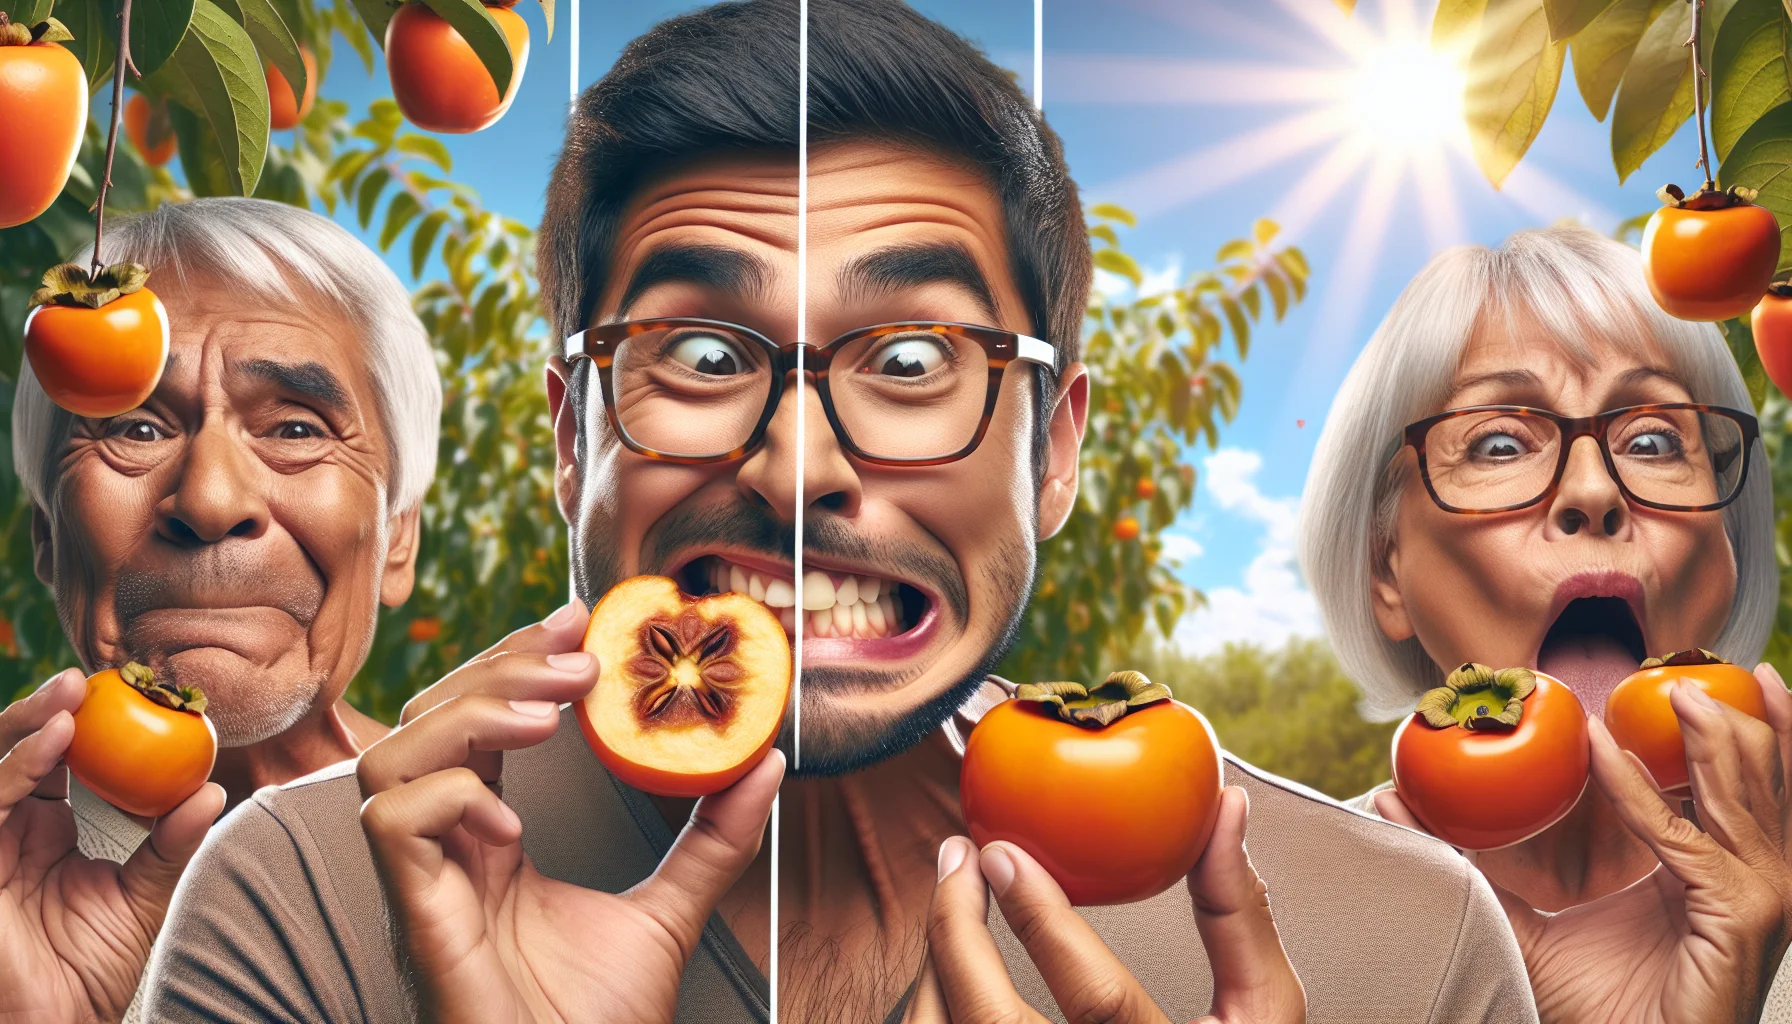 Create a humorous and realistic scenario set in a sunlit garden. Picture a split screen scenario, on one side, depict a South Asian man with a carefree smirk, erroneously biting into an unripe, hard, and light-colored persimmon, reflecting his minor gardening mishap. His facial expression should clearly say 'oops!' On the other side, portray an older, Caucasian woman with eyeglasses, holding a brilliantly orange and slightly soft persimmon, indicating ripeness. She should have an amused expression, witnessing the man's comical error. The backdrop should feature healthy, green persimmon trees under a bright sunny sky, encouraging a love for gardening.